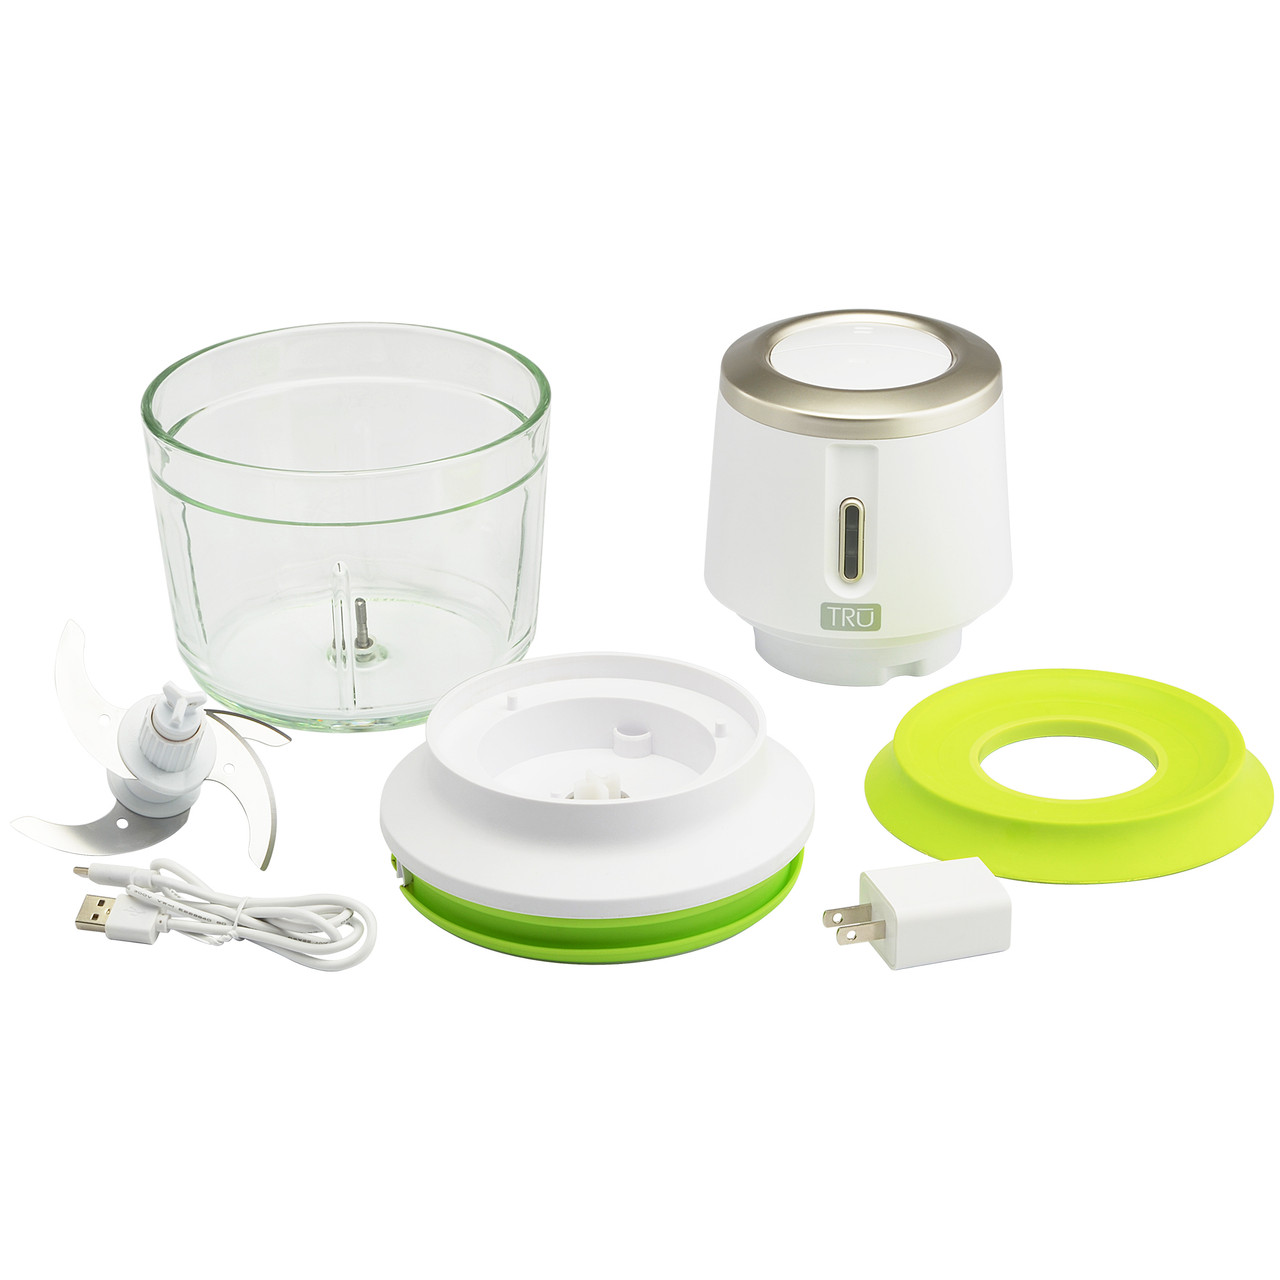 Cordless / Rechargeable Chopper With Scale, 2 Glass Bowls & 2